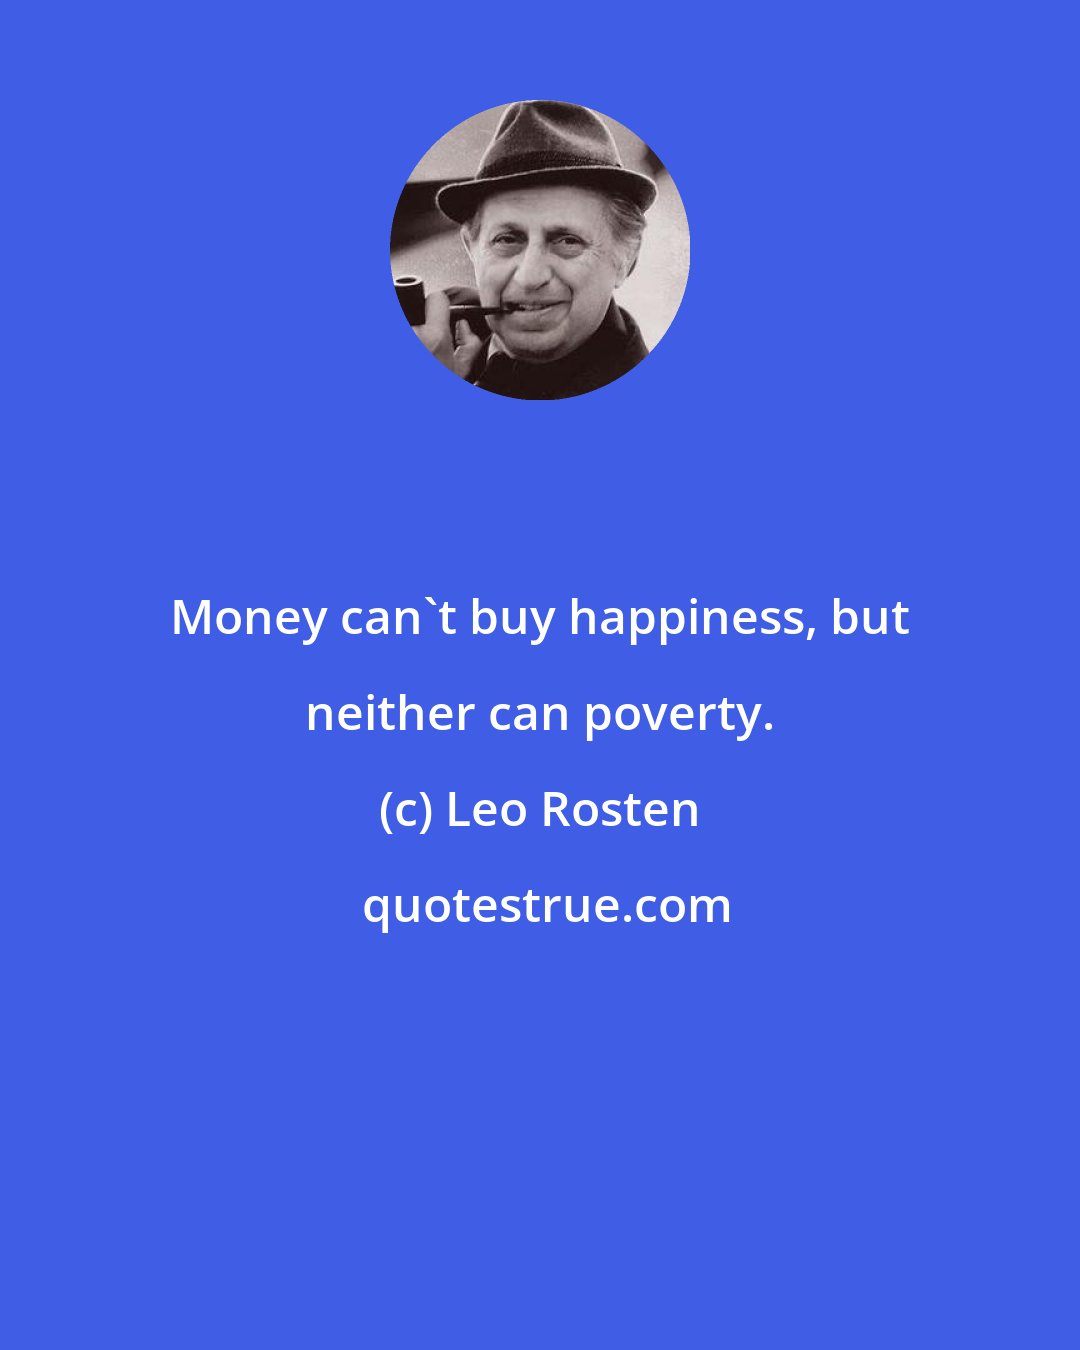 Leo Rosten: Money can't buy happiness, but neither can poverty.